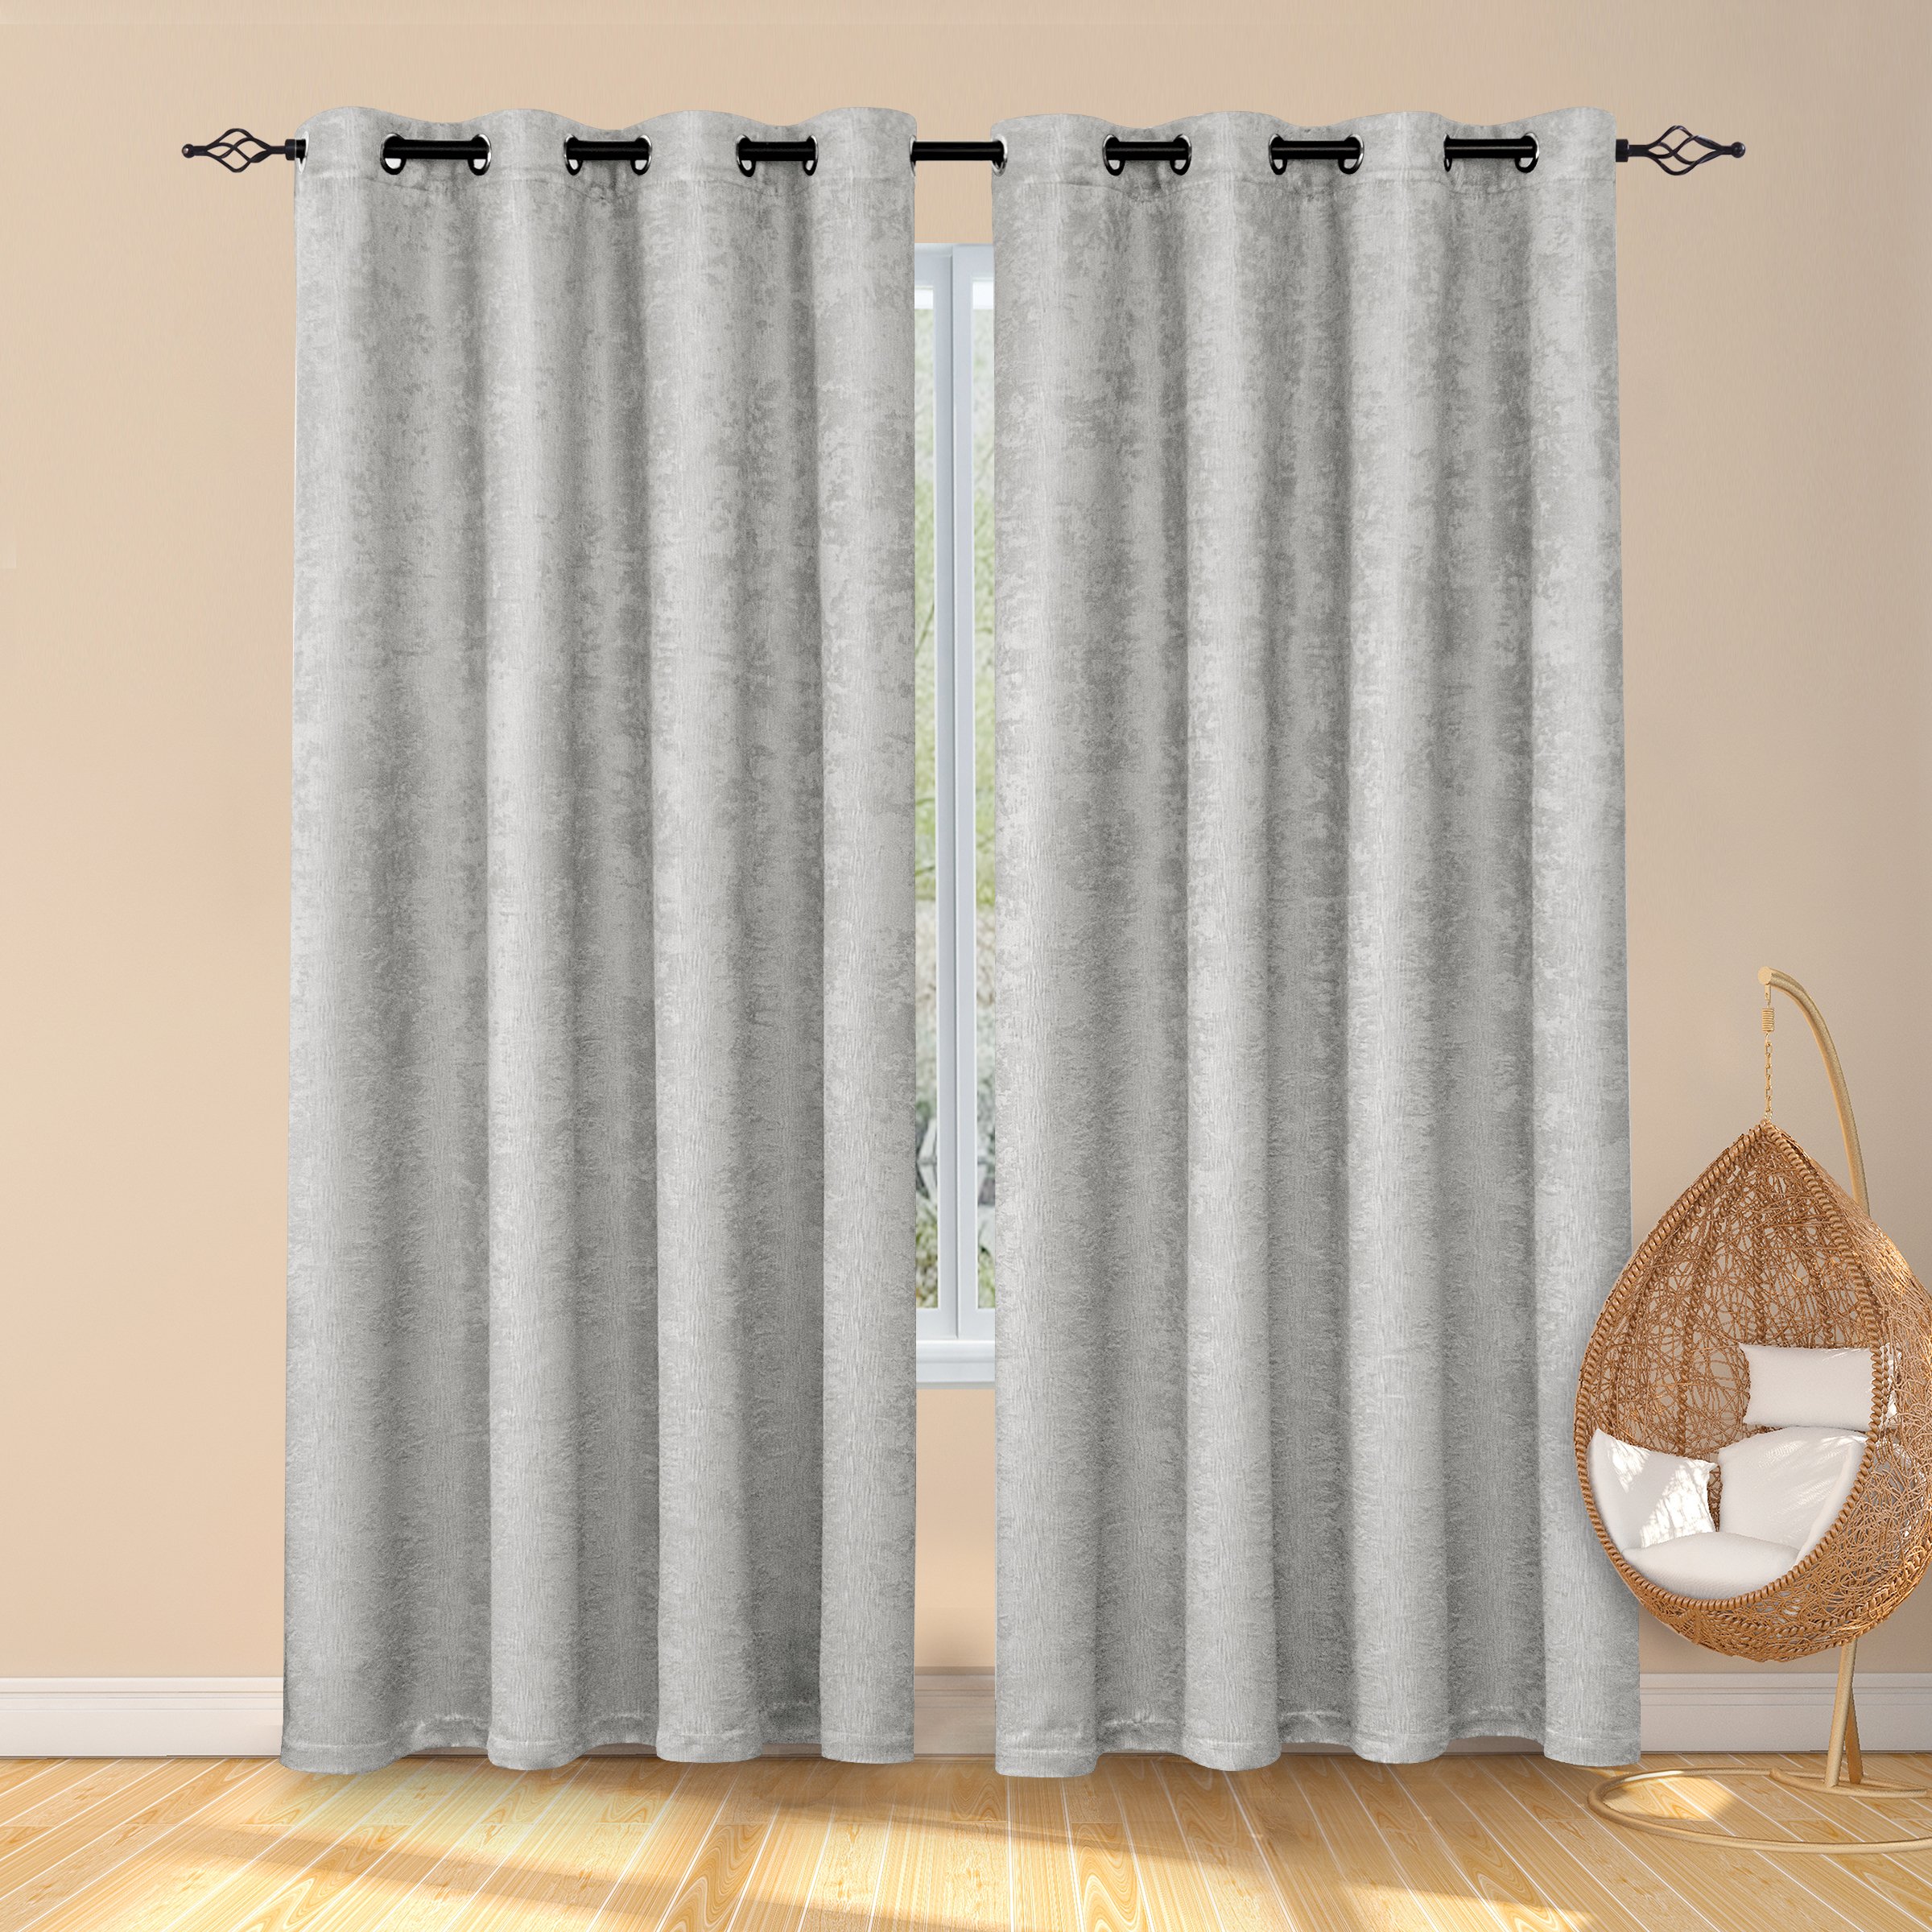 Subrtex Thermal Insulated Grommet Blackout Curtains for Bedroom, Set of 2 Panels, 53"×96", Greyish White - image 1 of 5